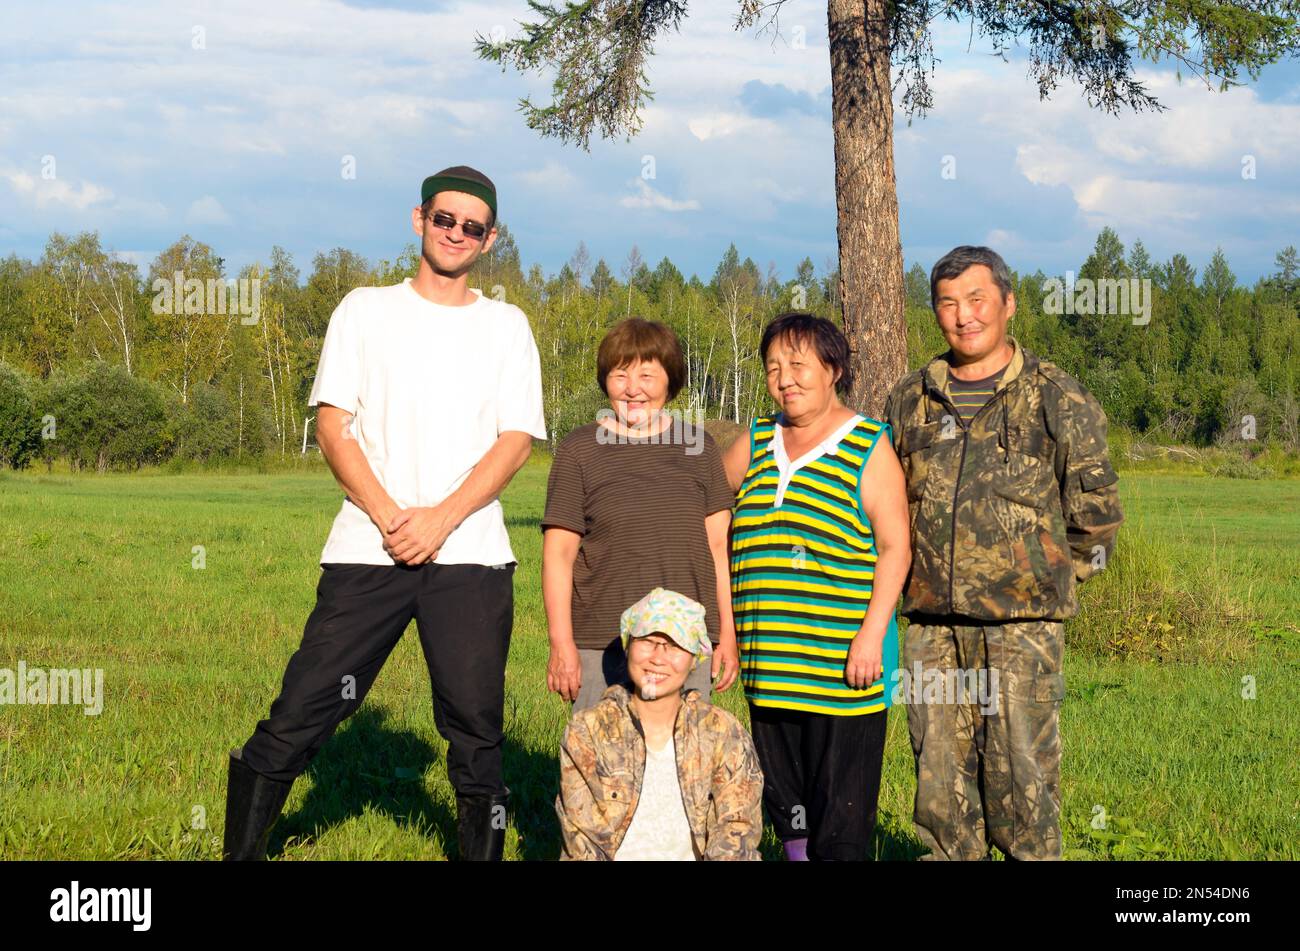 A tall Russian man in boots stands next to a short Asian Yakuts and a girl sitting on the grass posing for a photo in a field in the wild North forest Stock Photo